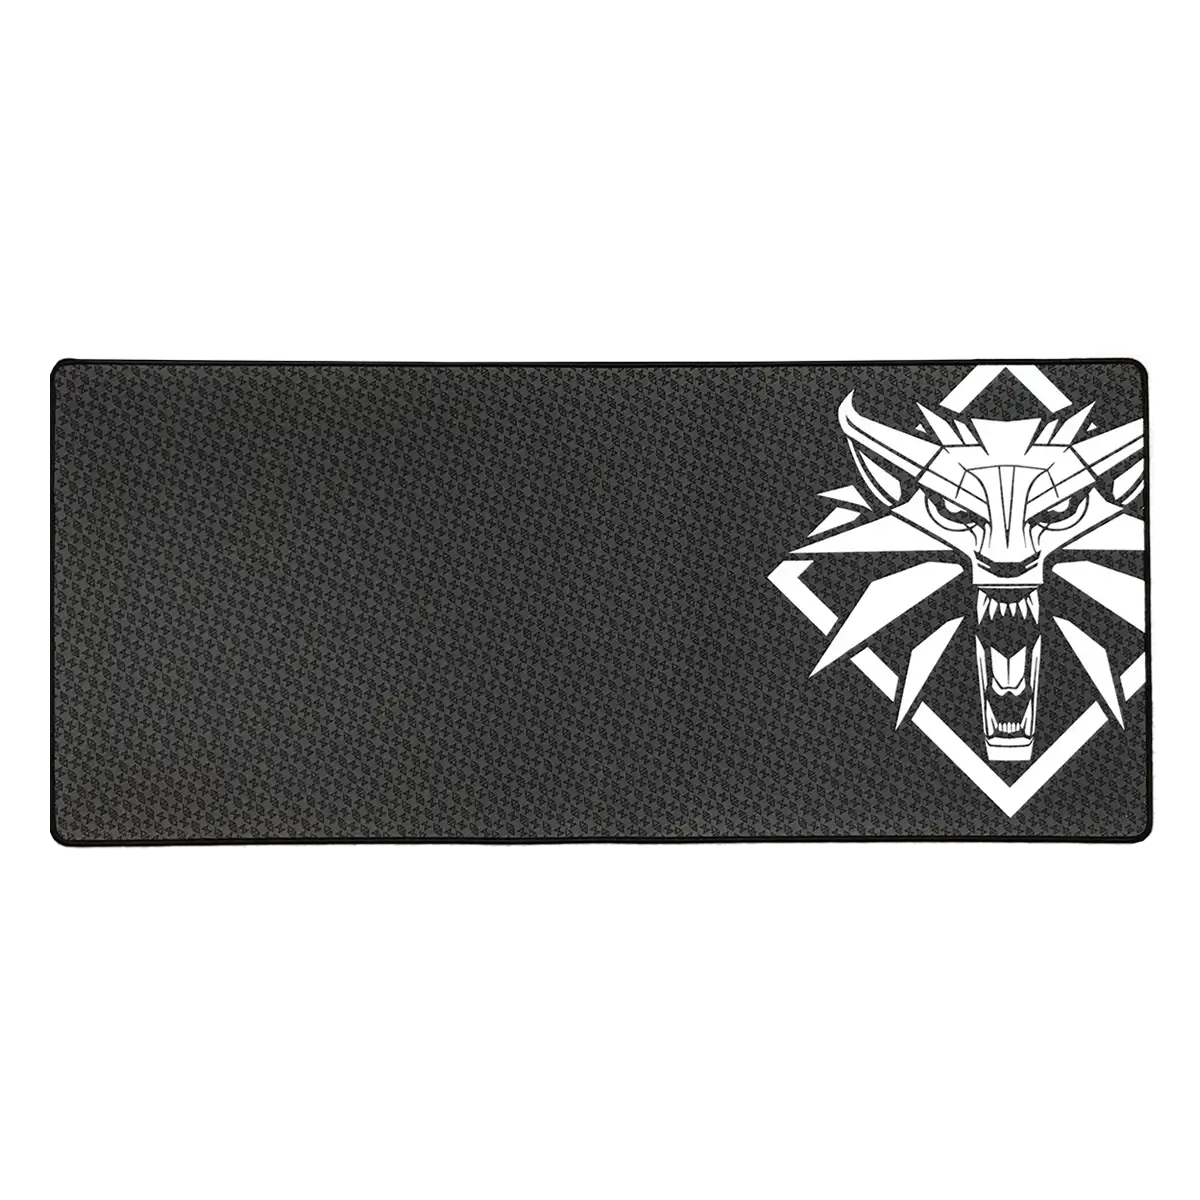 The Witcher Mousemat "Signs"